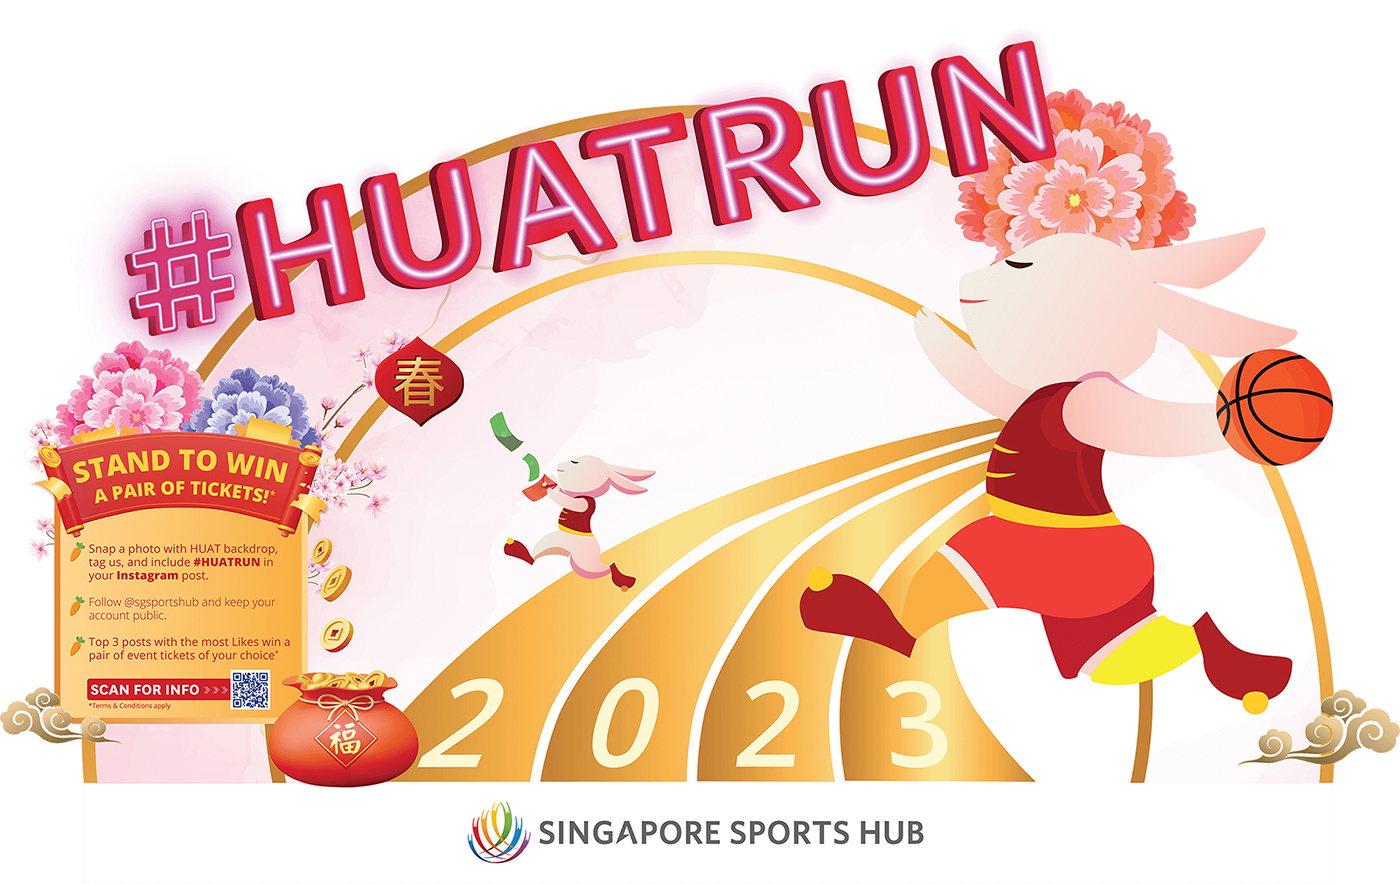 USHER IN THE YEAR OF THE RABBIT WITH A RACE TO THE FINISHING LINE